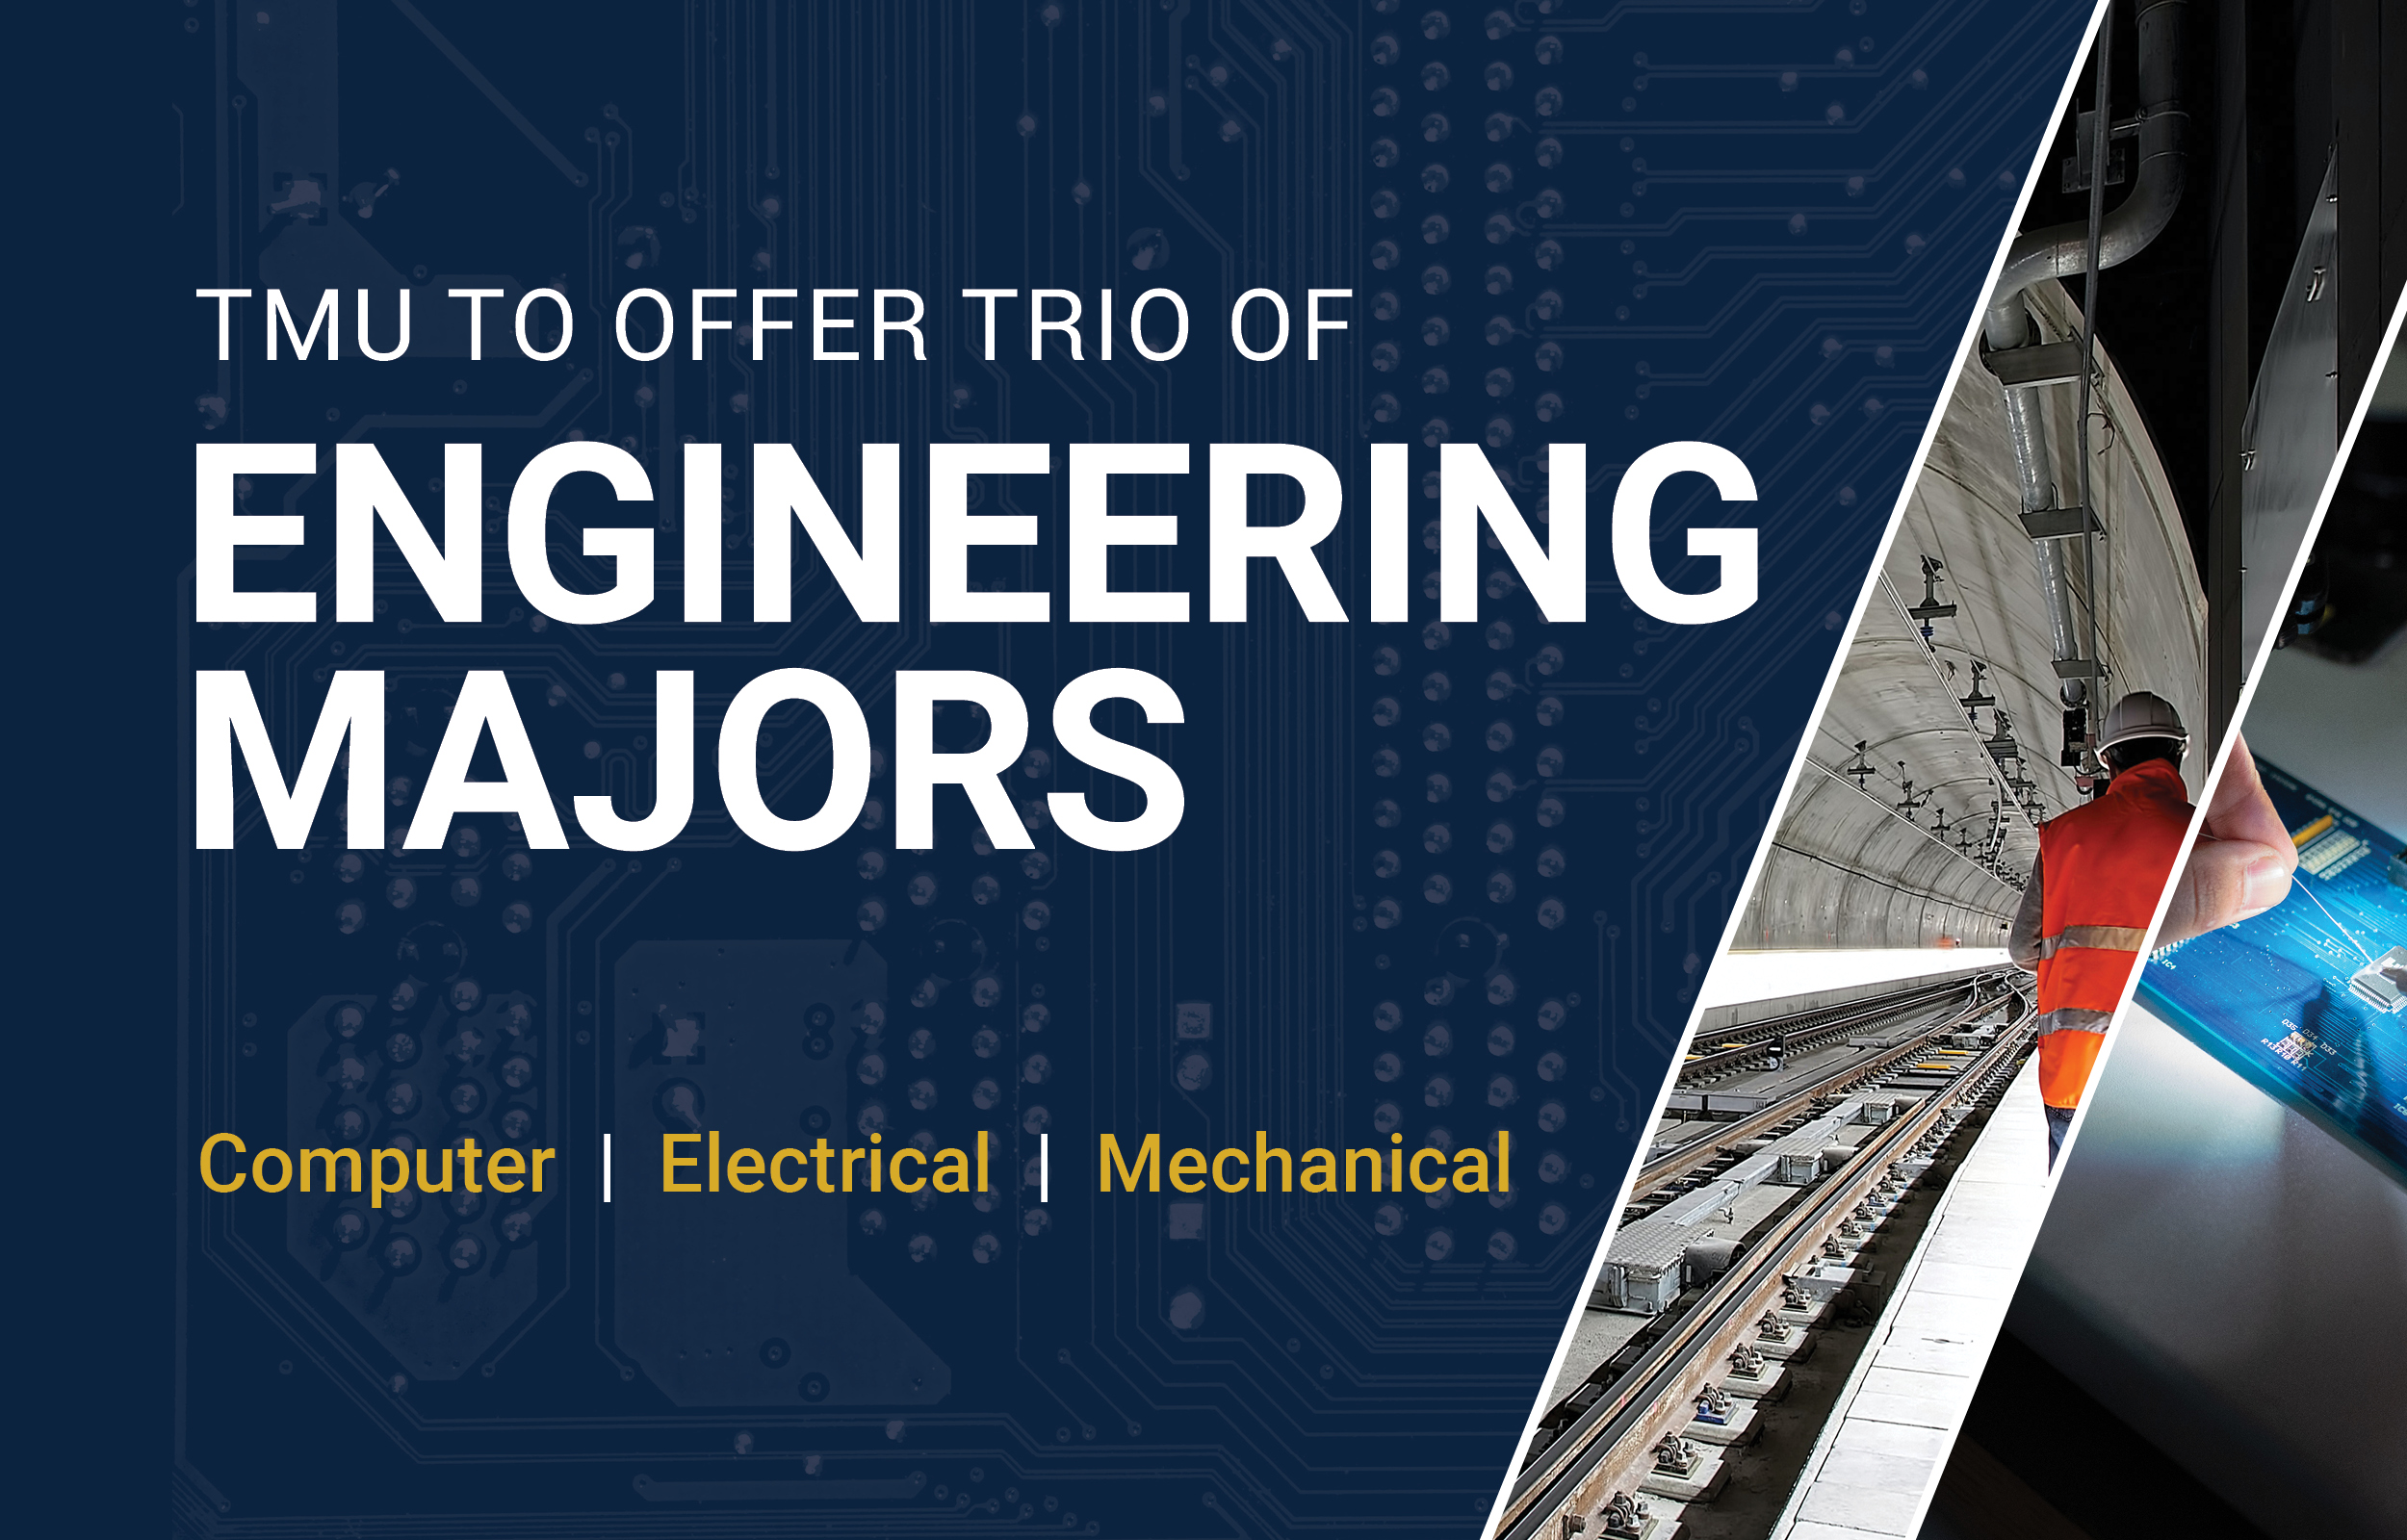 TMU To Offer Trio of Engineering Majors image